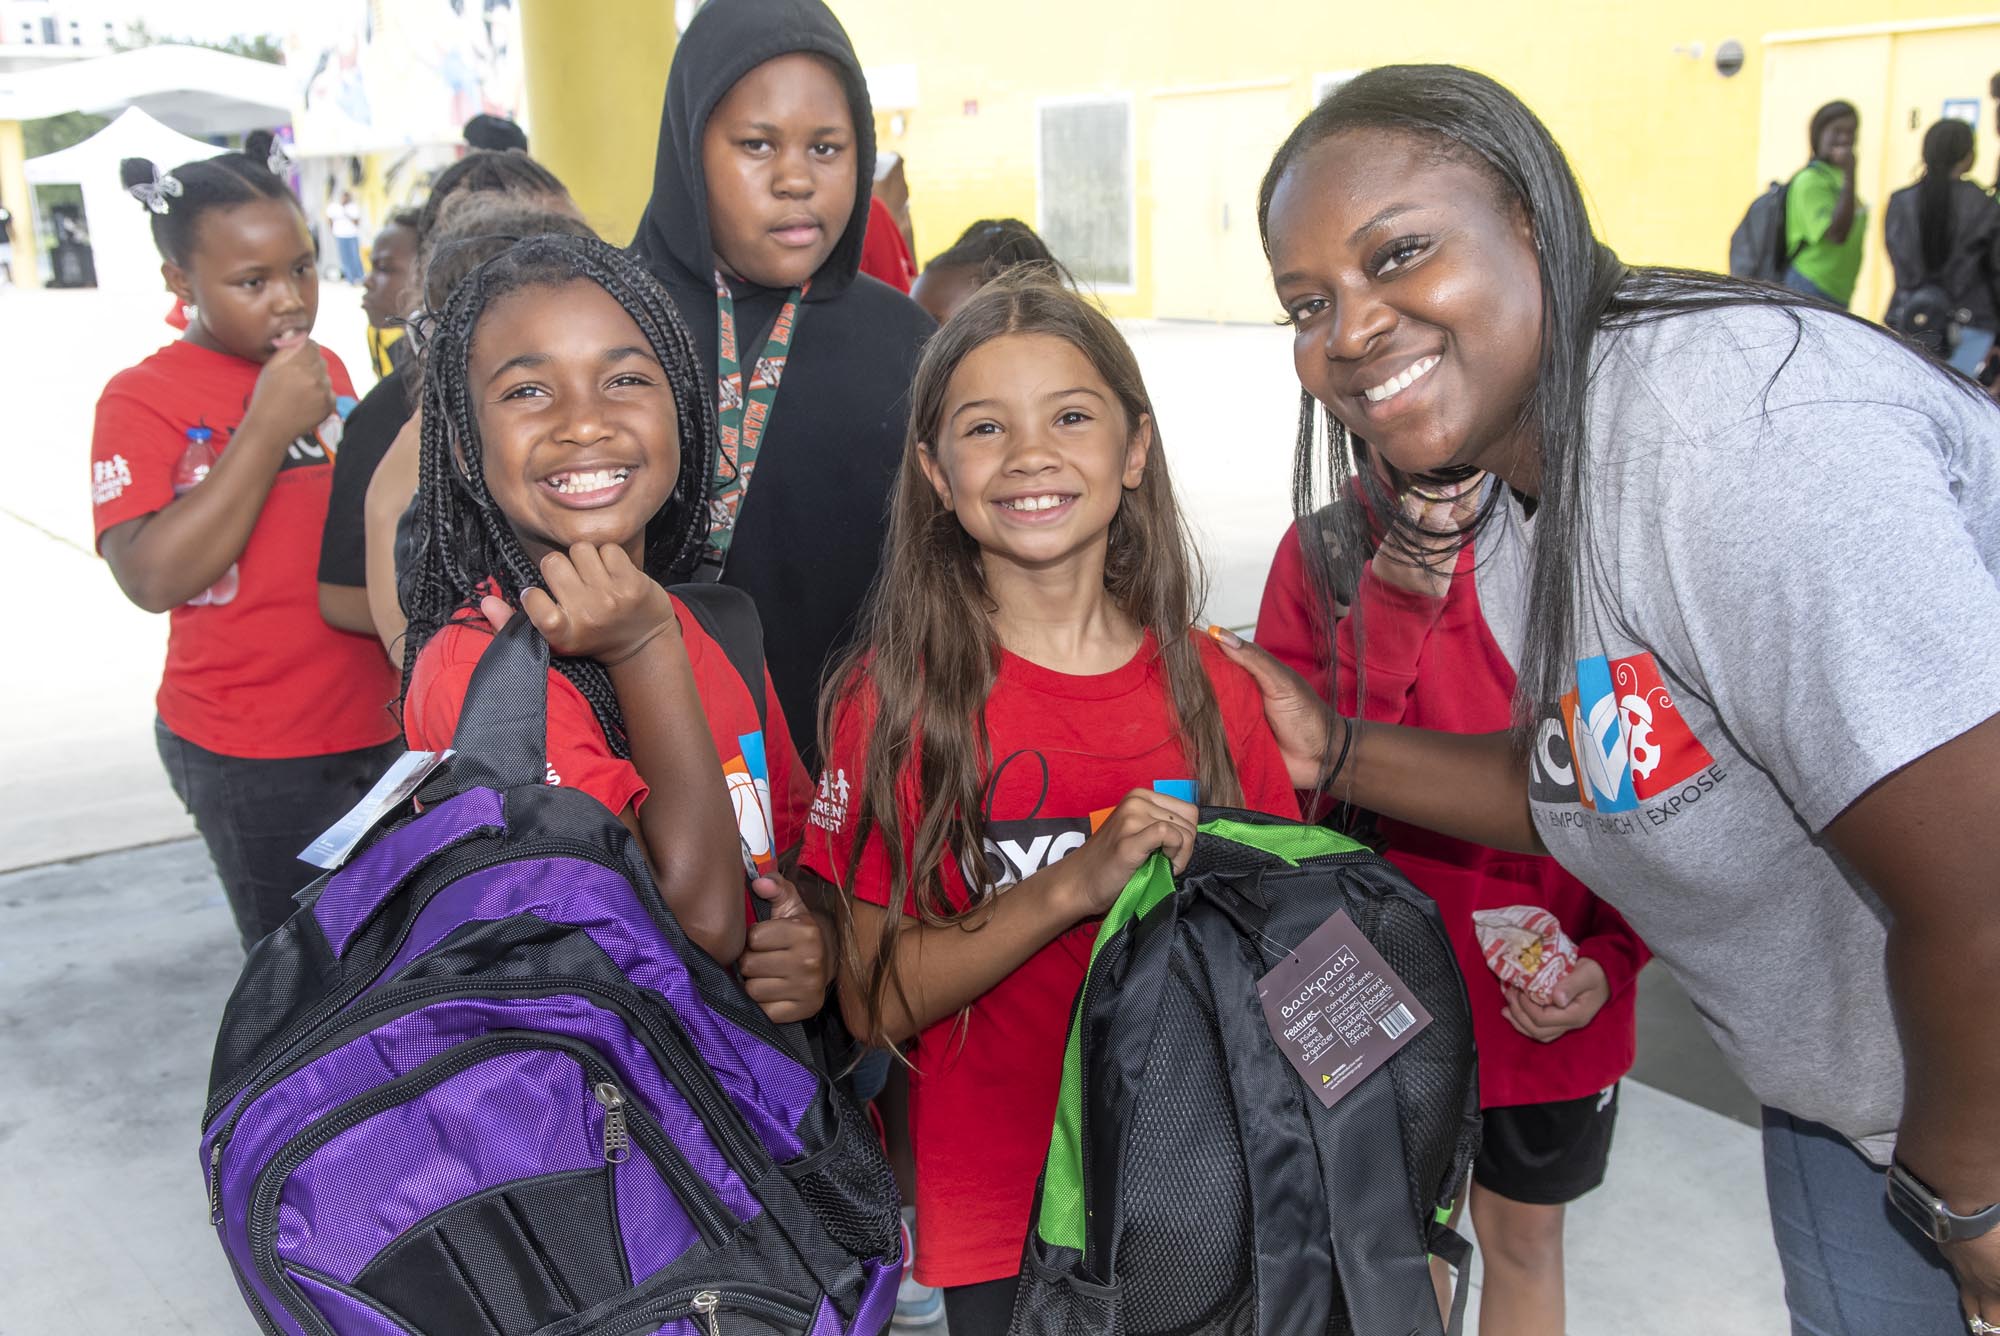 OYC Miami summer campers receive a backpack filled with supplies to start off the new school year.